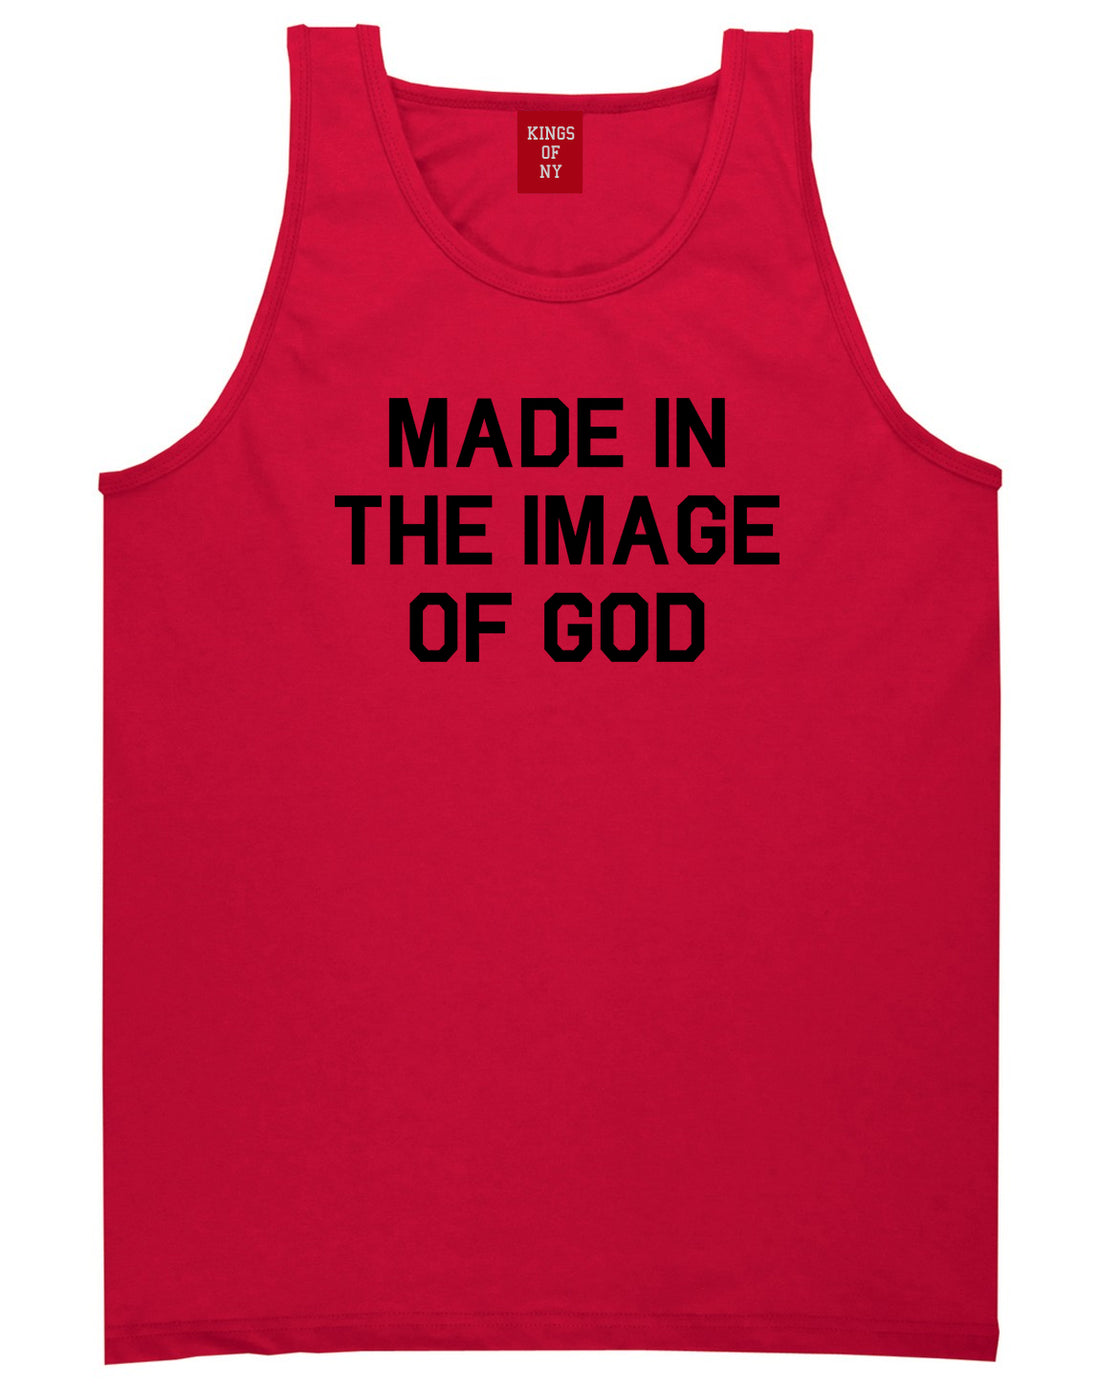 Made In The Image Of God Mens Tank Top Shirt Red by Kings Of NY